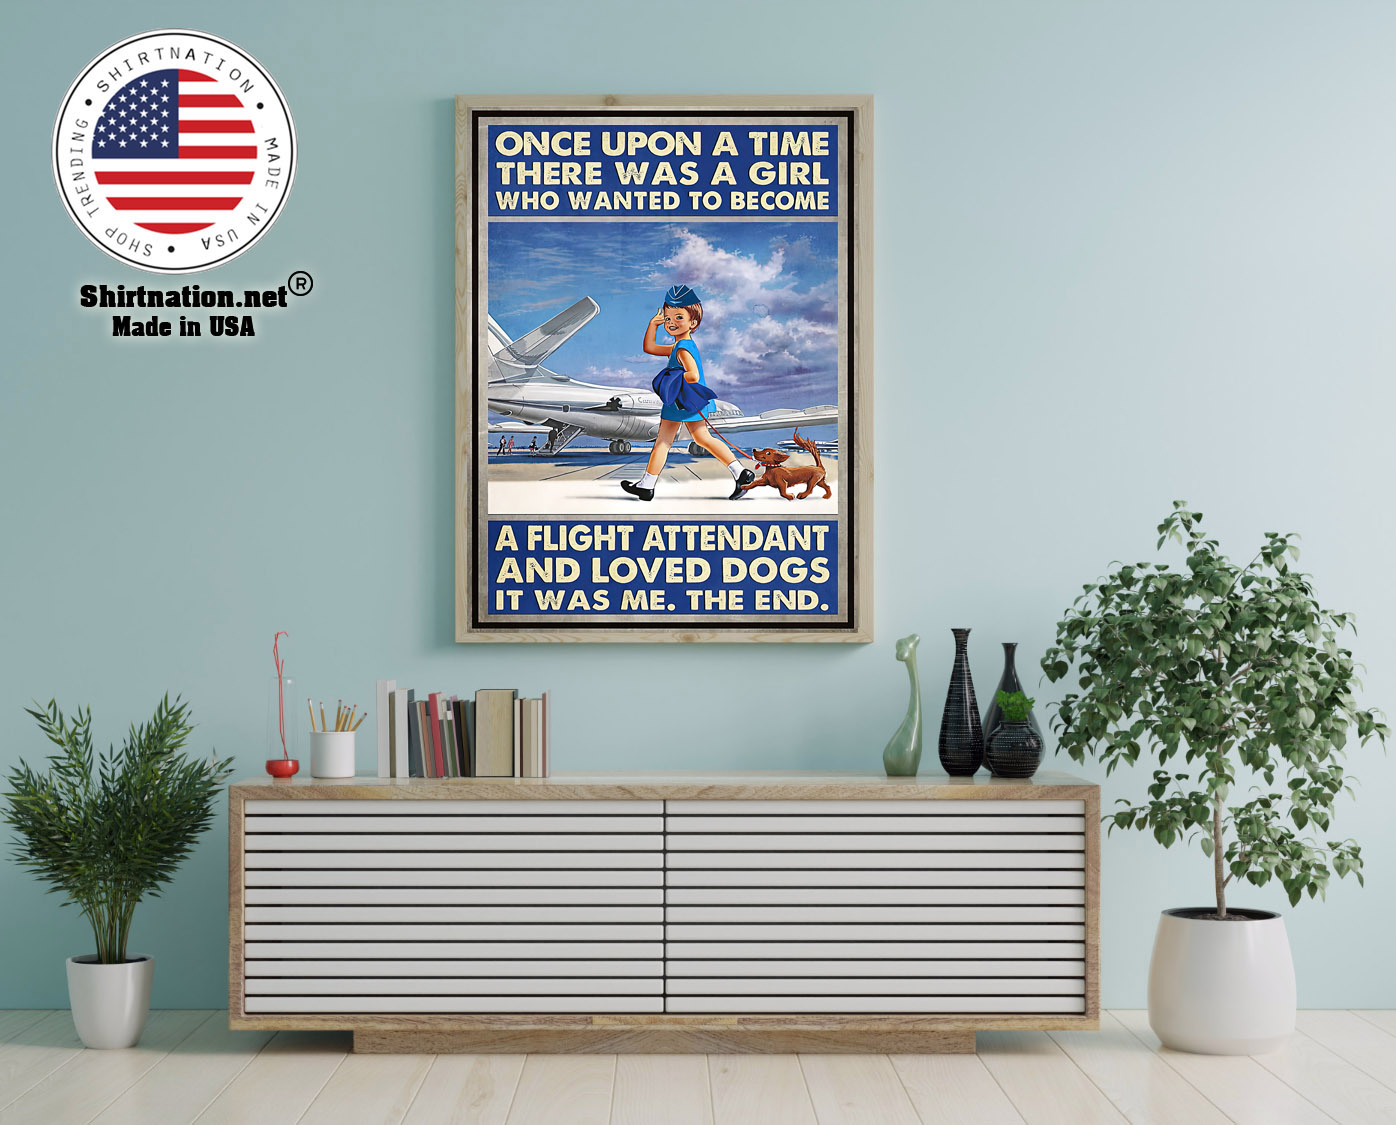 Once upon a time there was a girl who wanted to become a flight attendant and loved dogs poster 12